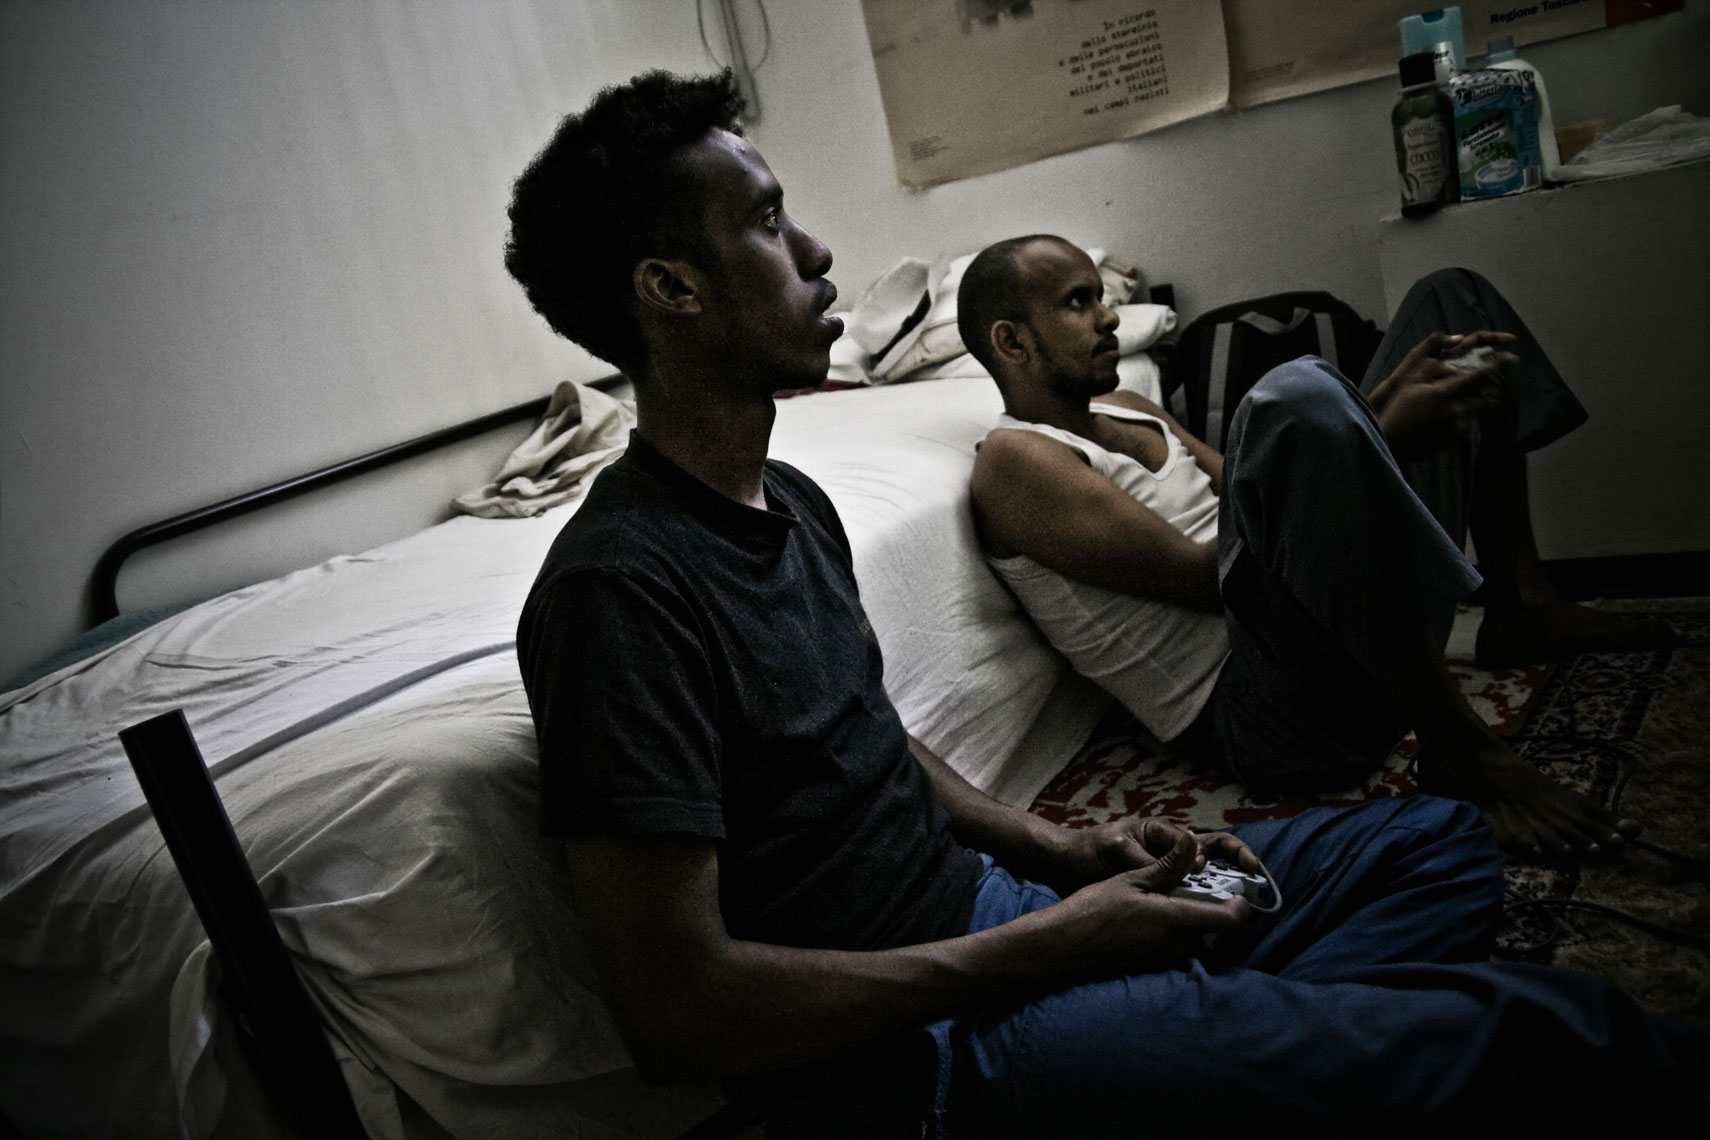 ITALY. Florence, 20th June 2011. Two Somali refugees playing with an electronic game console inside a former office building occupied by Somali and Eritrean refugees.